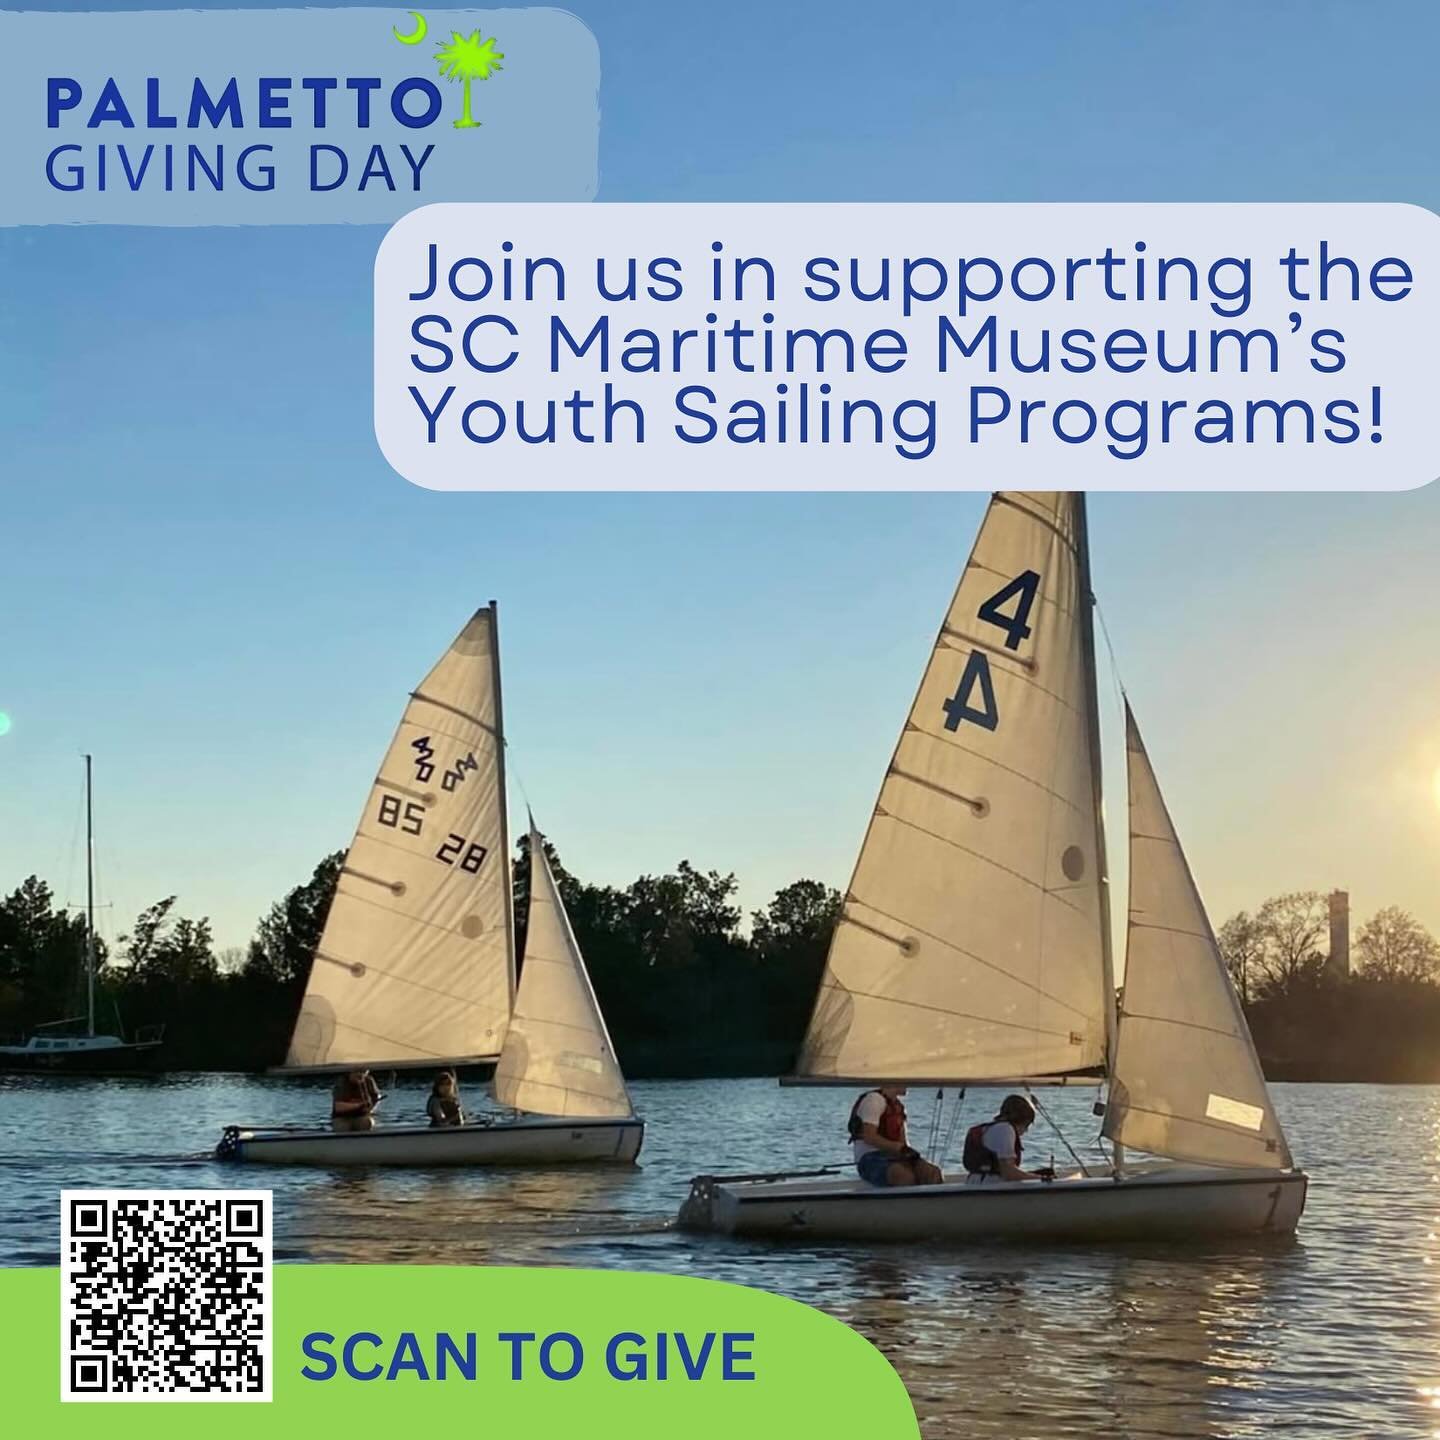 All hands on deck for Palmetto Giving Day! We&rsquo;re thrilled to support the South Carolina Maritime Museum&rsquo;s youth sailing program and invite you to join us in giving back to our community&rsquo;s young sailors. Together, we can make a splas